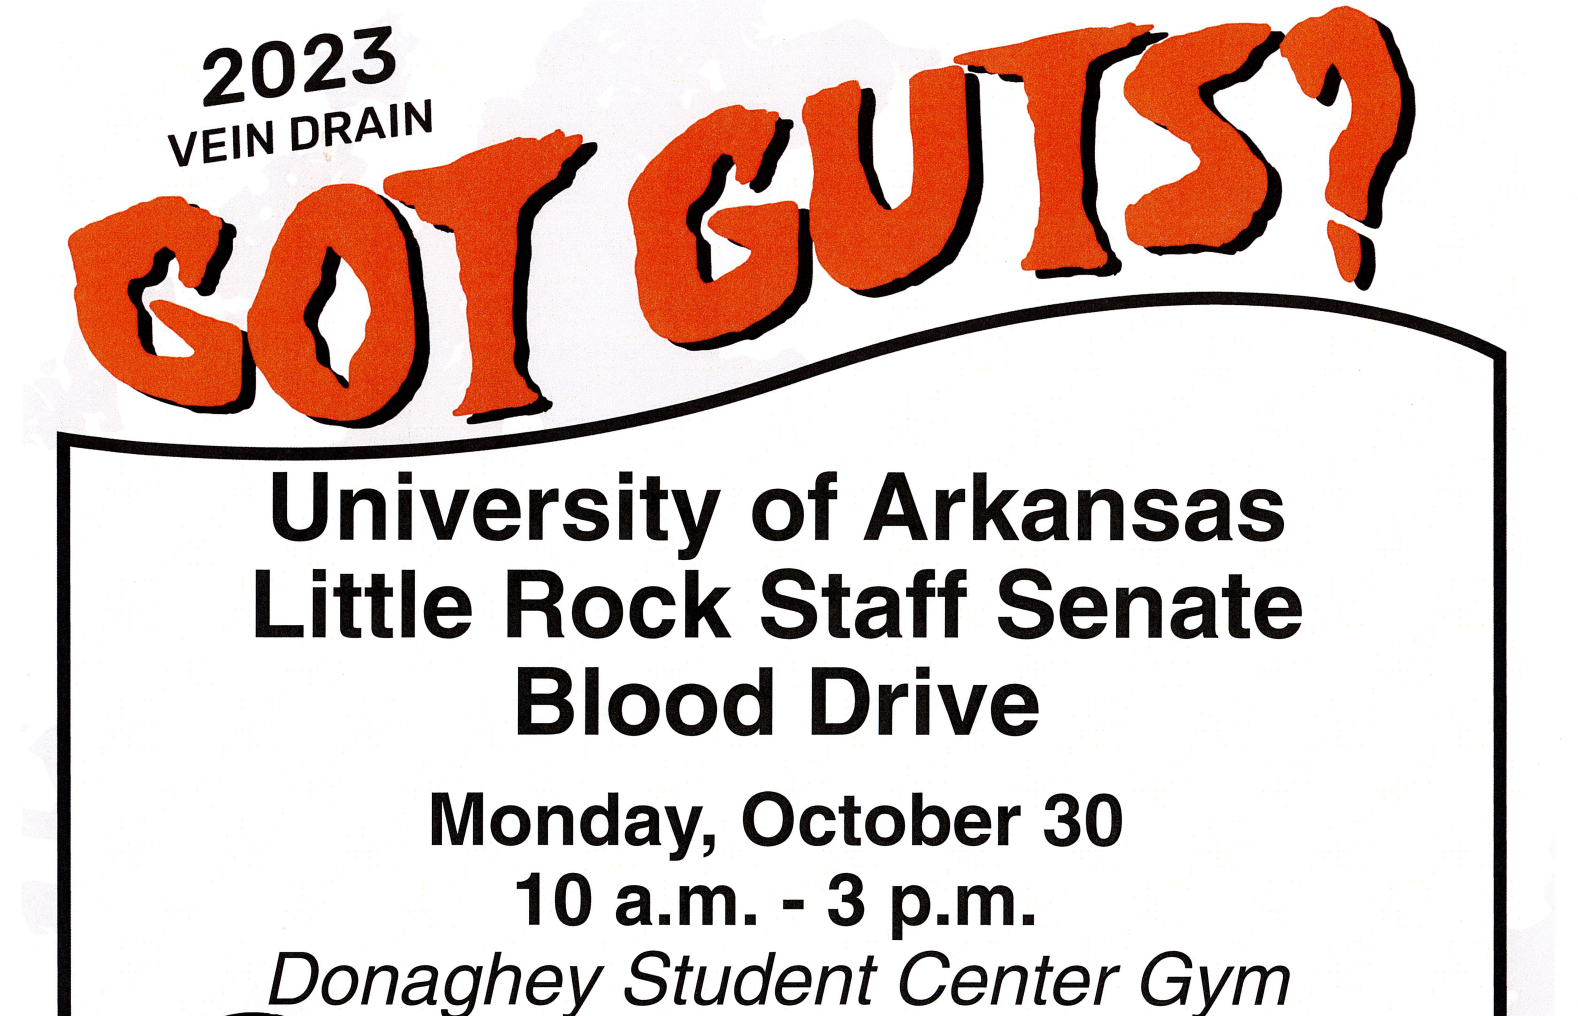 The UA Little Rock Staff Senate will hold a blood drive from 10 a.m. to 3 p.m. Monday, Oct. 30.